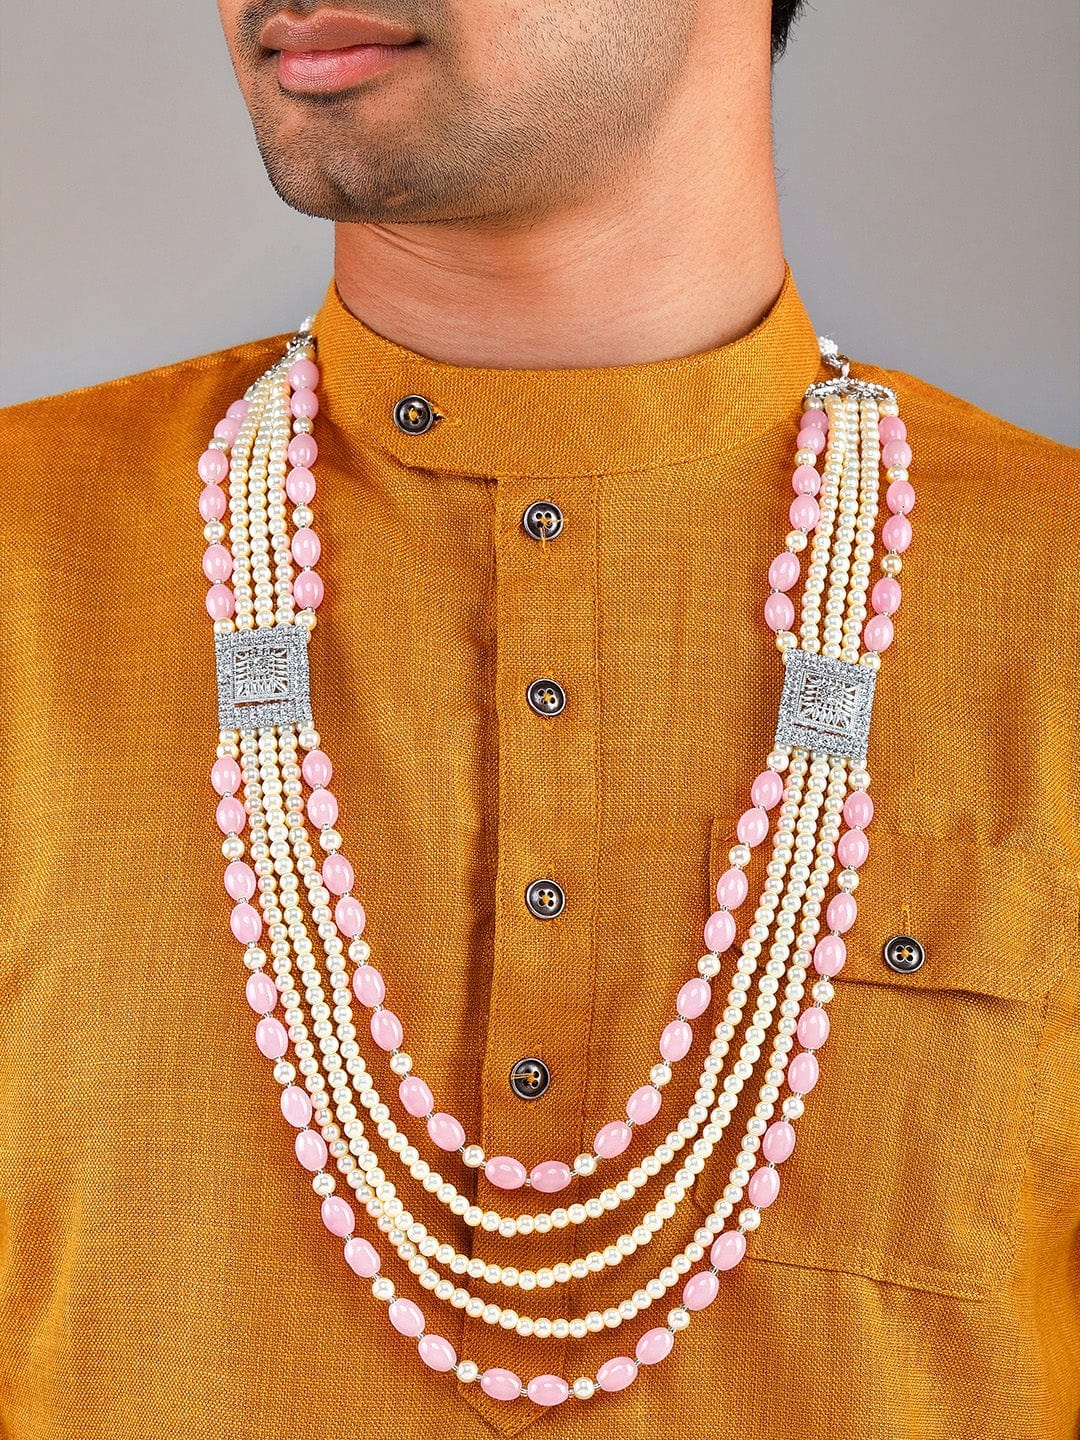 Rubans Pink & Gold Beaded Layered Mens Necklace. Necklace